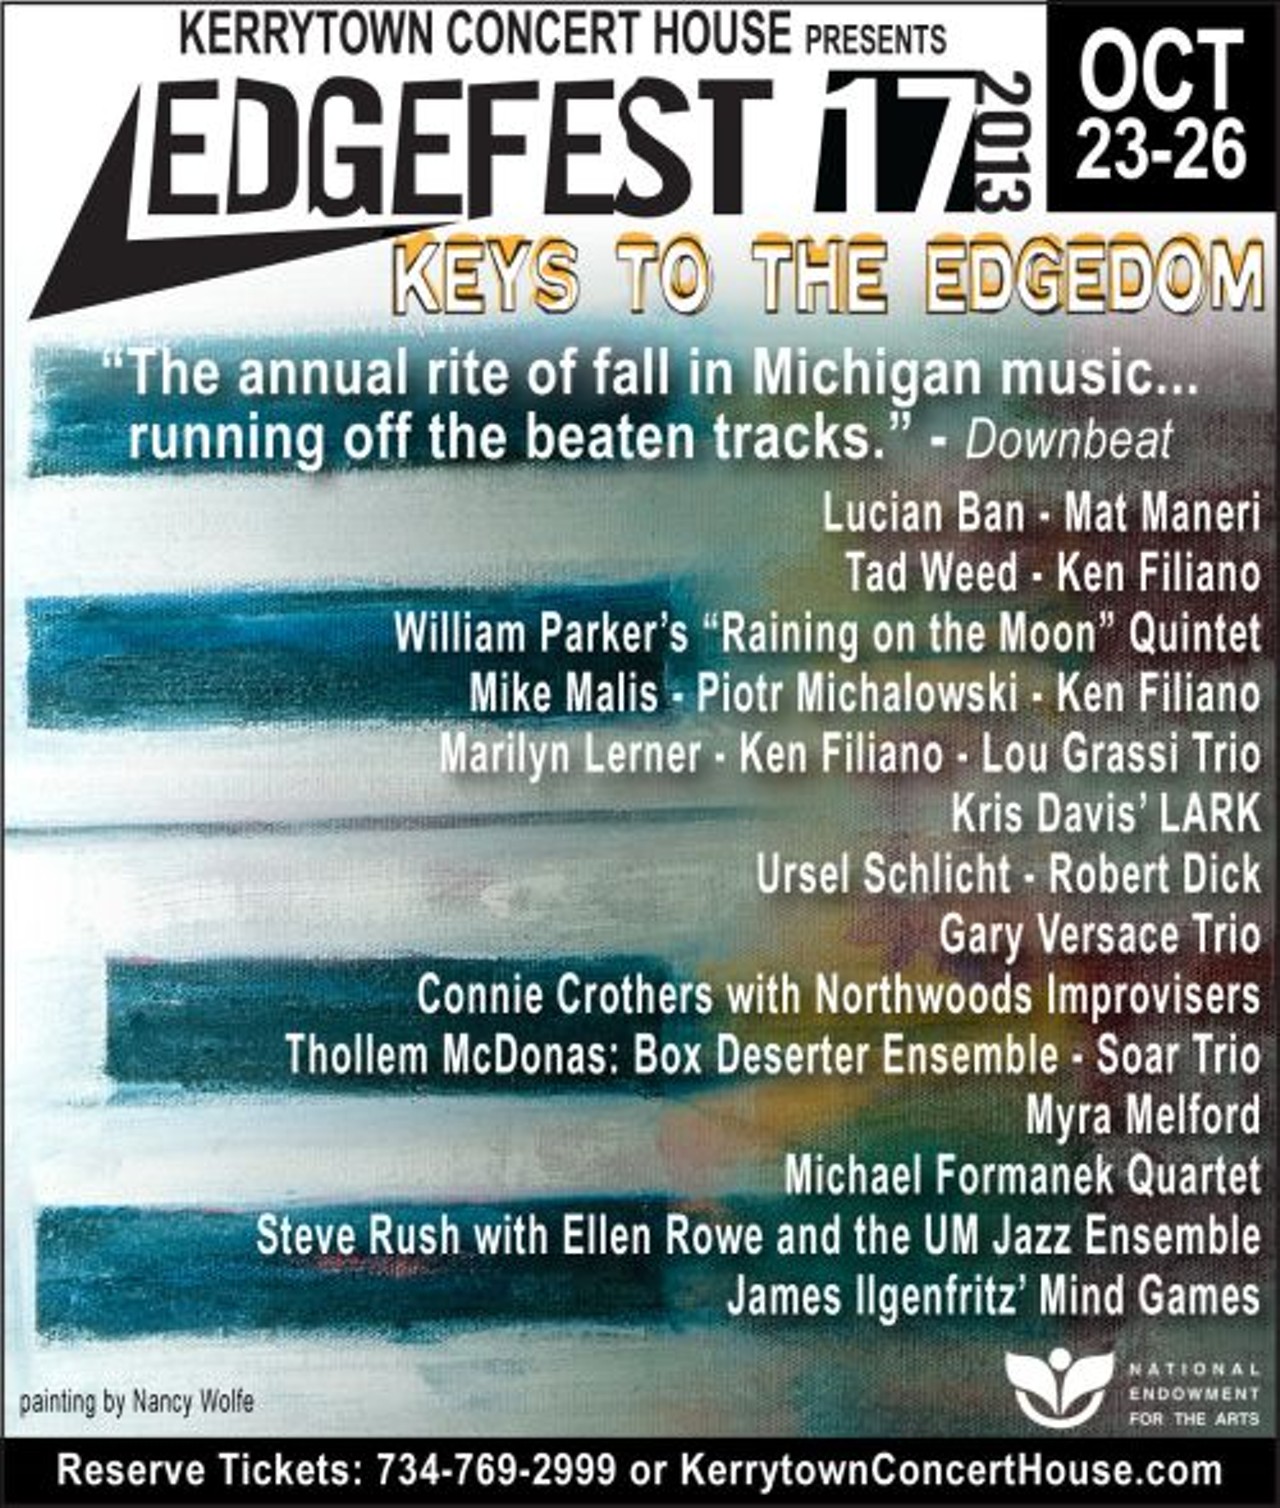 Edgefest
Featuring music created by improvisers and composers who explore the versatility of the piano.  The roster includes international musicians as well as performers and ensembles from Southeast Michigan. October 23-26, Kerrytown Concert House, 415 N. 4th Avenue
Ann Arbor, MI (734) 769-2999 more info here.